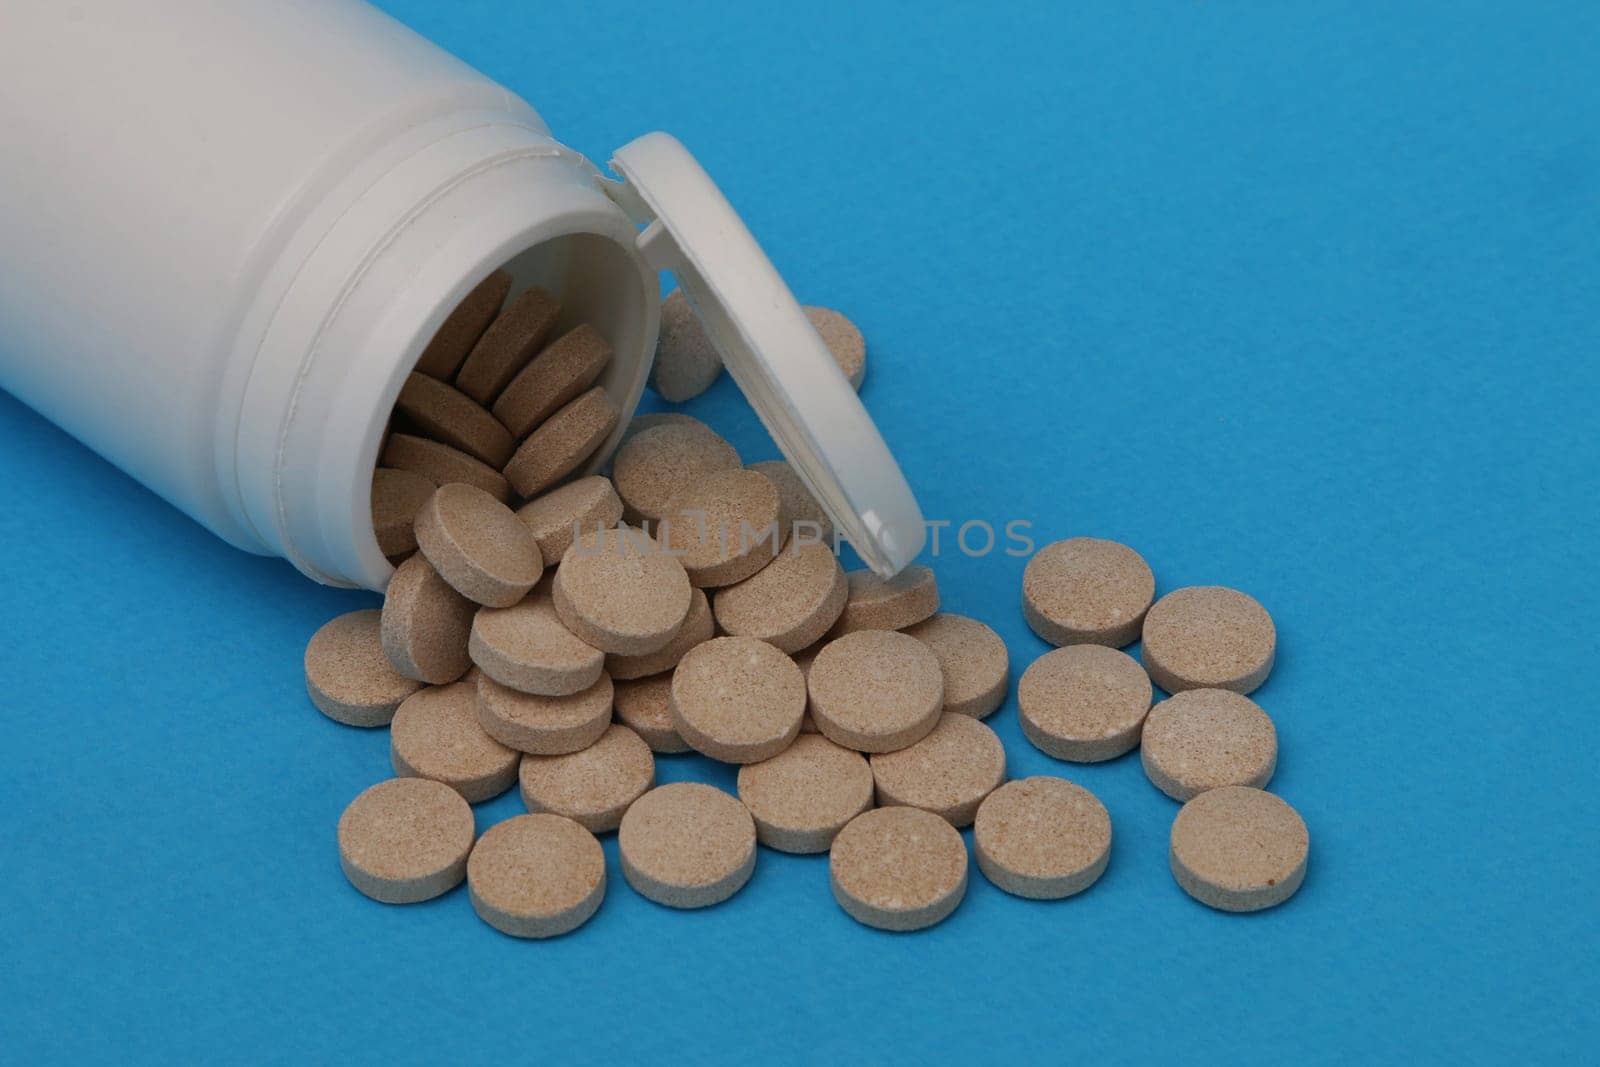 White plastic bottle with scattered brown pills on a blue paper background. Medicine and health concept.